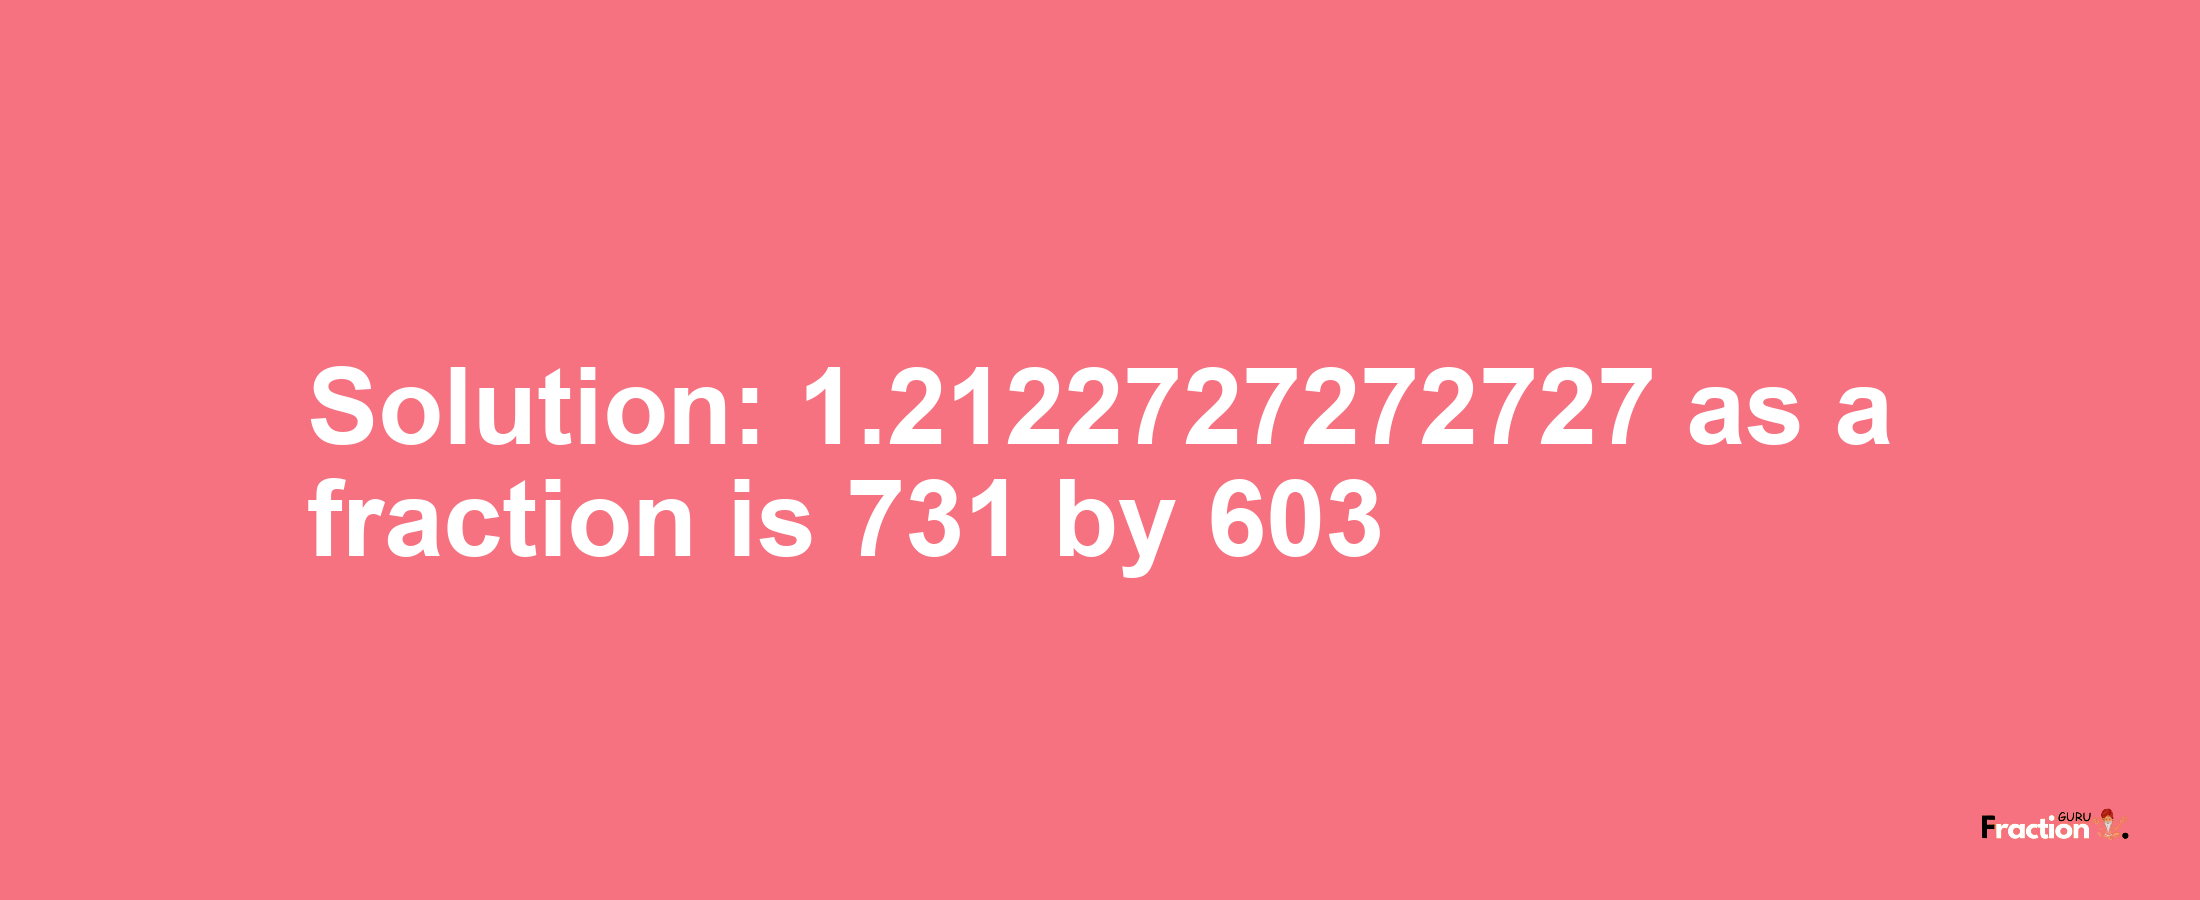 Solution:1.2122727272727 as a fraction is 731/603